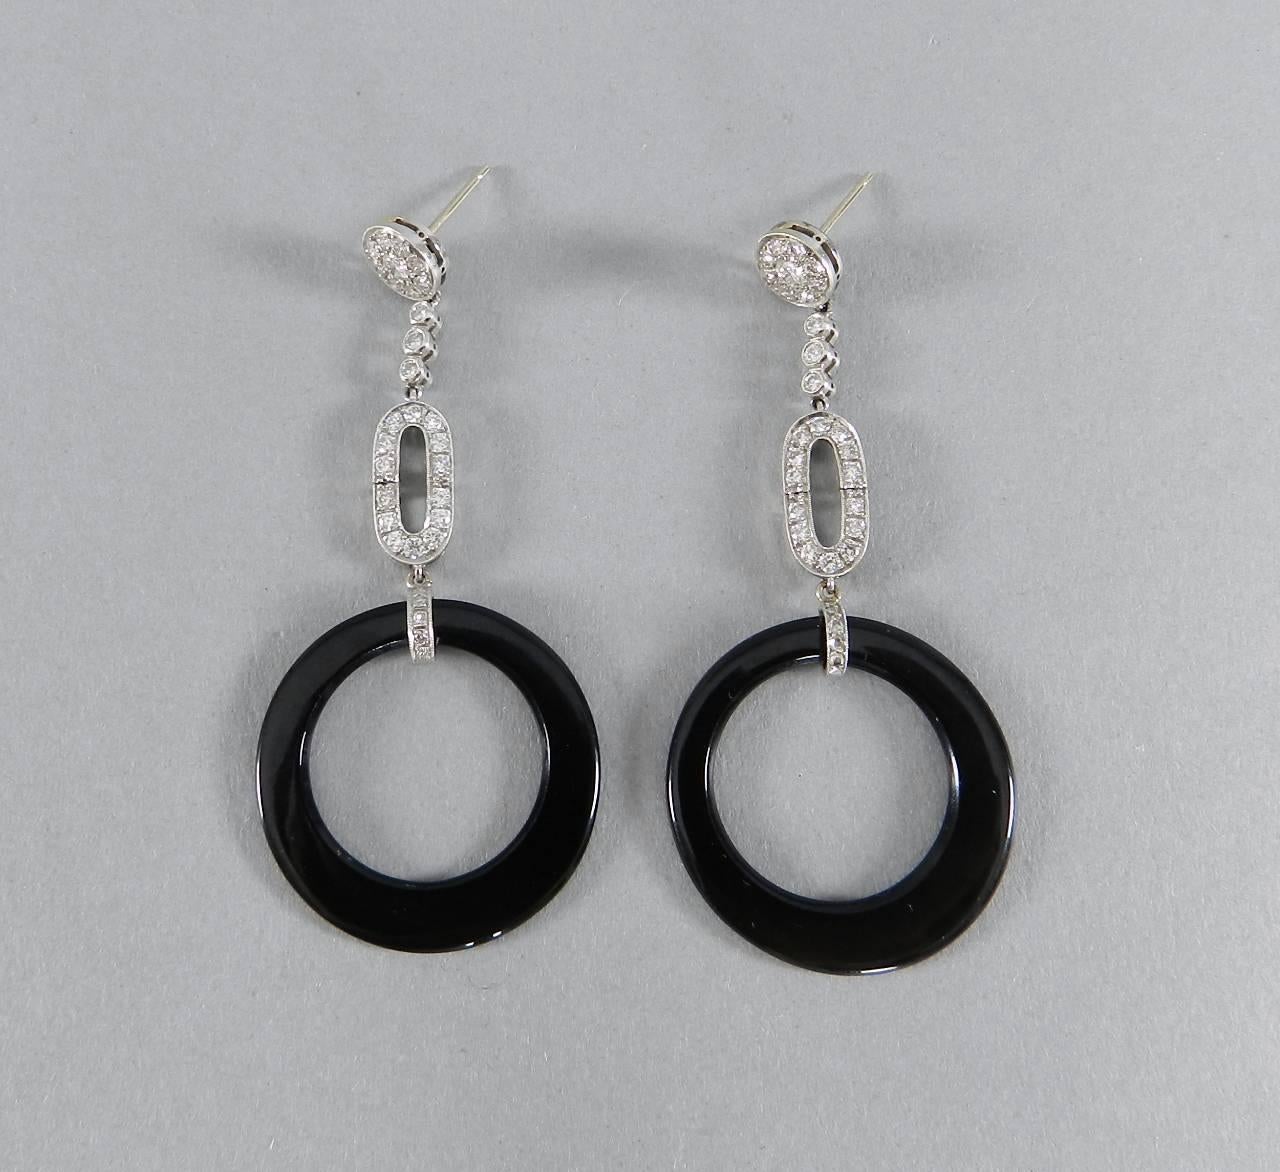 1920's Art Deco 14k White Gold, Diamond, Onyx Drop Earrings.  Vintage earrings originally purchased at Demner New York.  Hinged long drop design, round onyx rings, and posts for pierced ears.  Total gross diamond weight approx. 1.42 ct and total